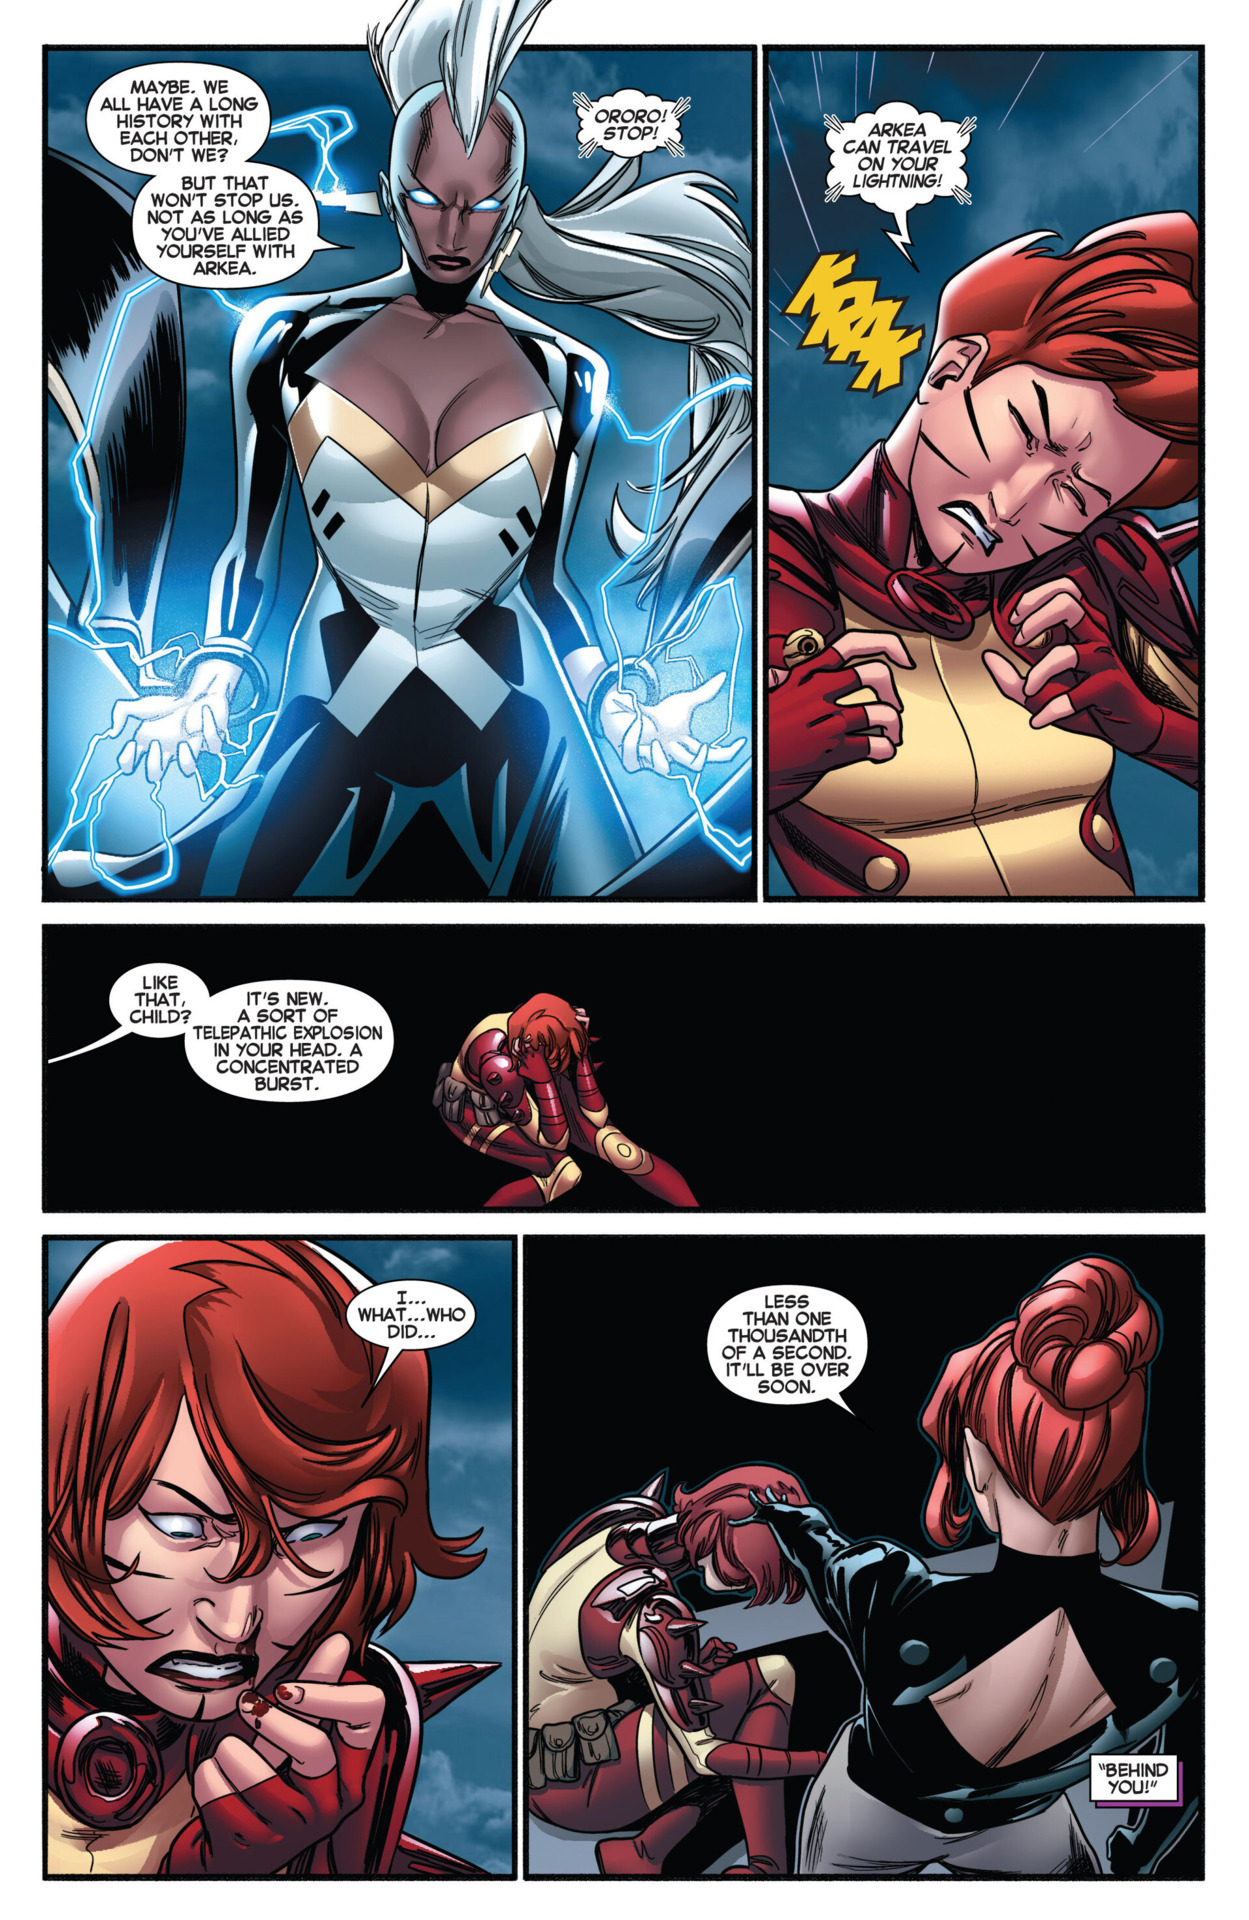 Madelyne Pryor cripples Rachel Summers by using a new sort of attack, where she causes a psychic explosion in one's head in short bursts. According to Maddie, it would be over in less than one thousandth of a second